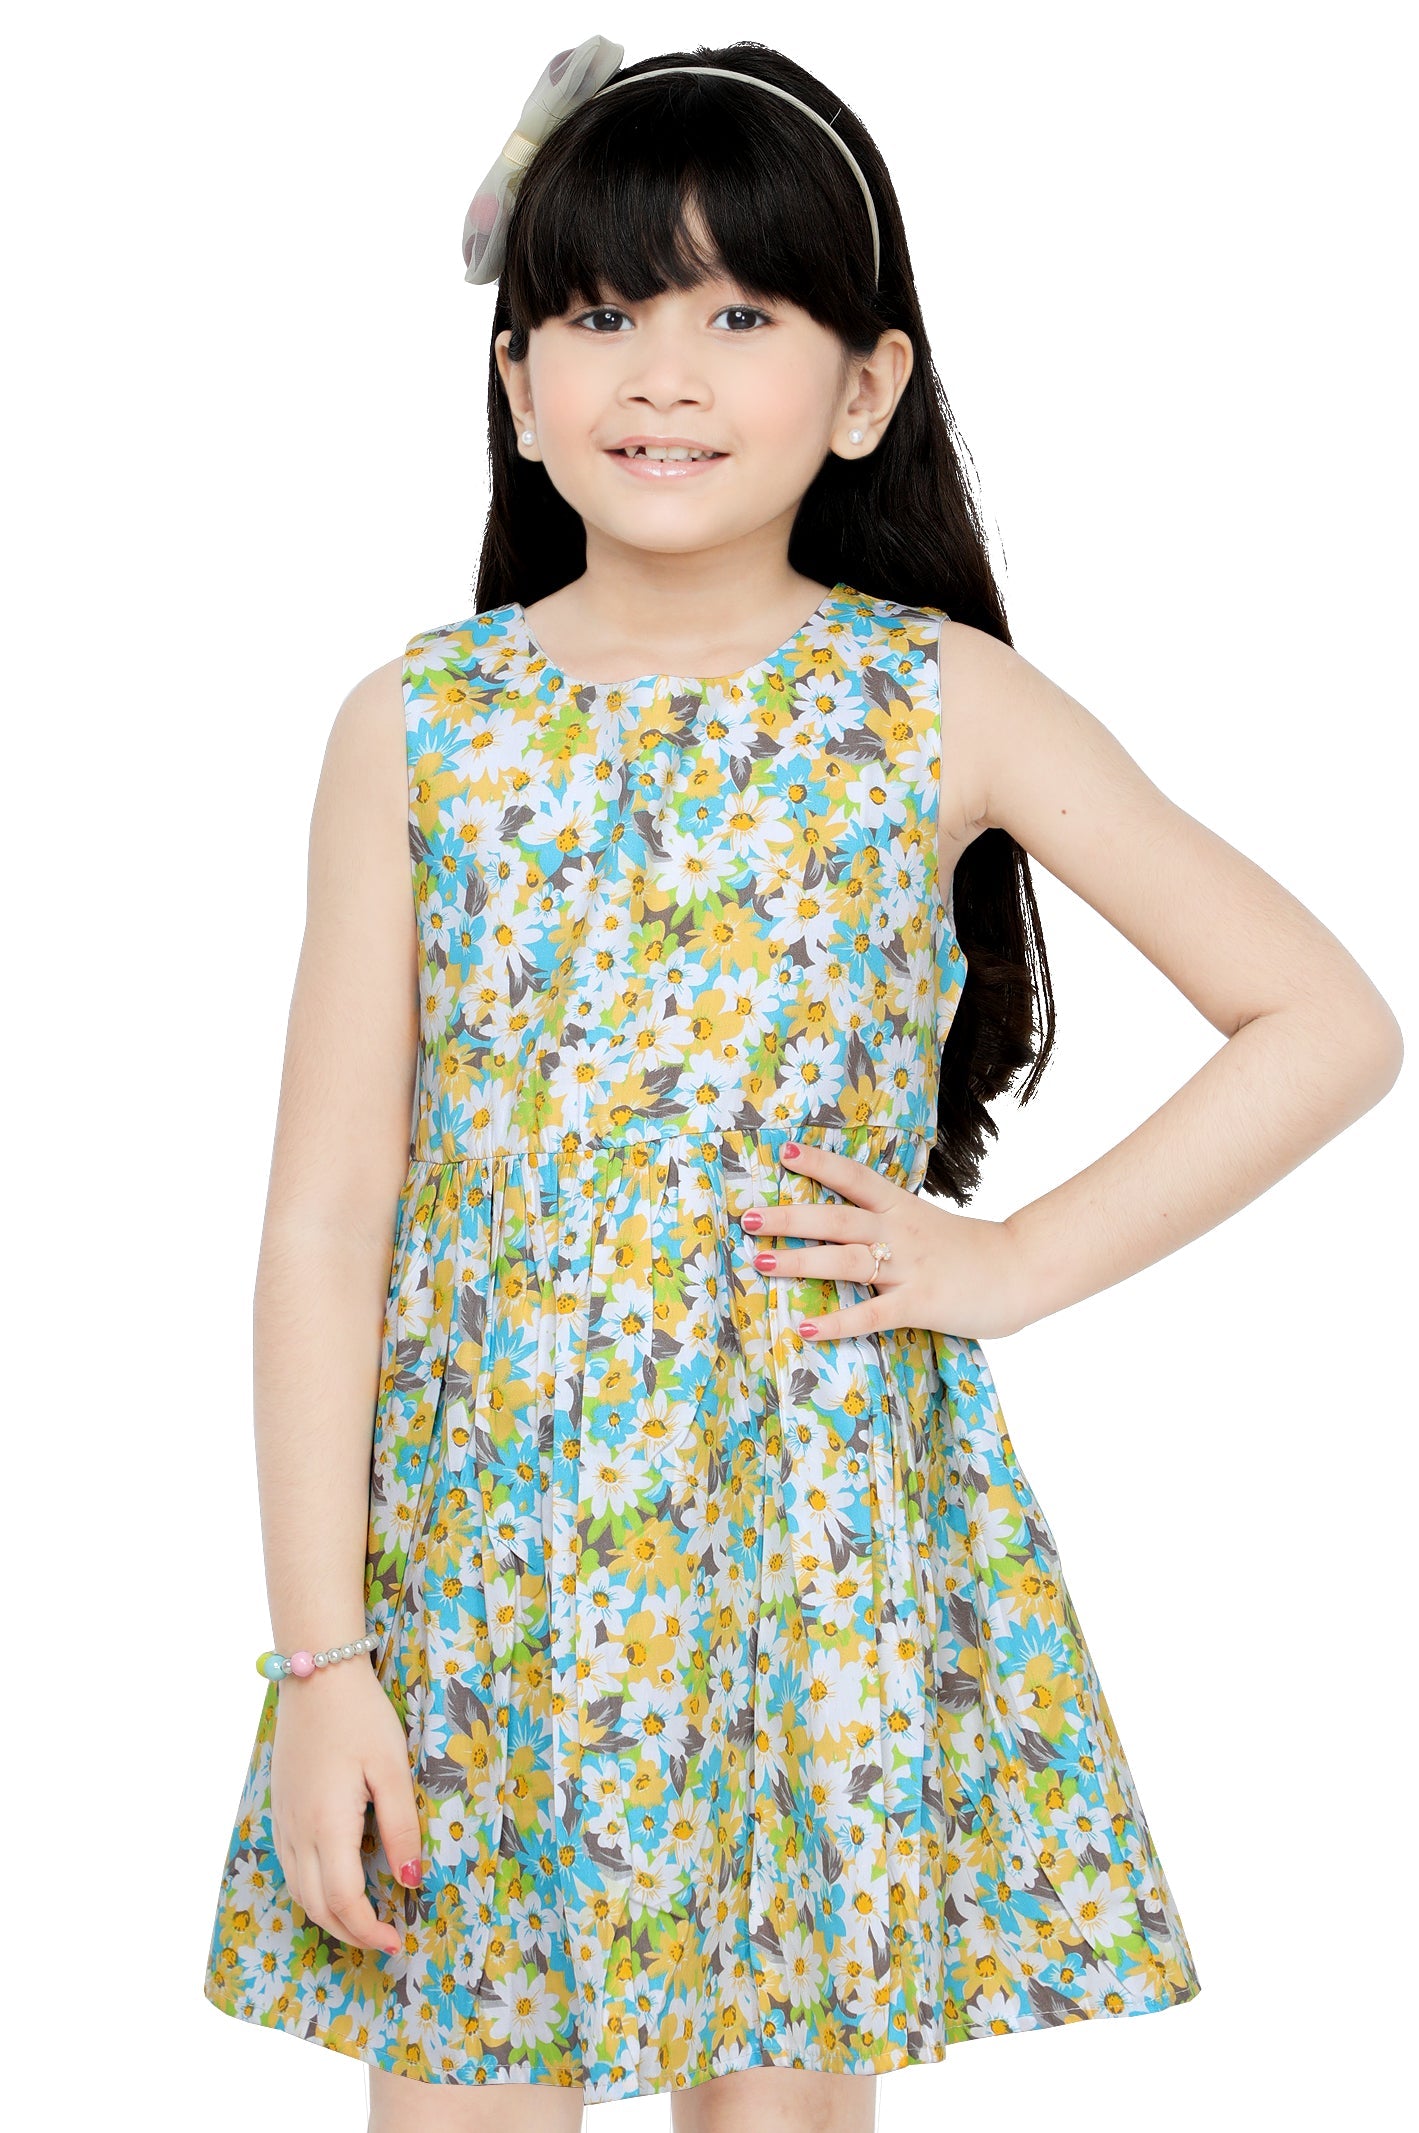 Girls Frock in Yellow SKU: KGL-0329-YELLOW - Diners